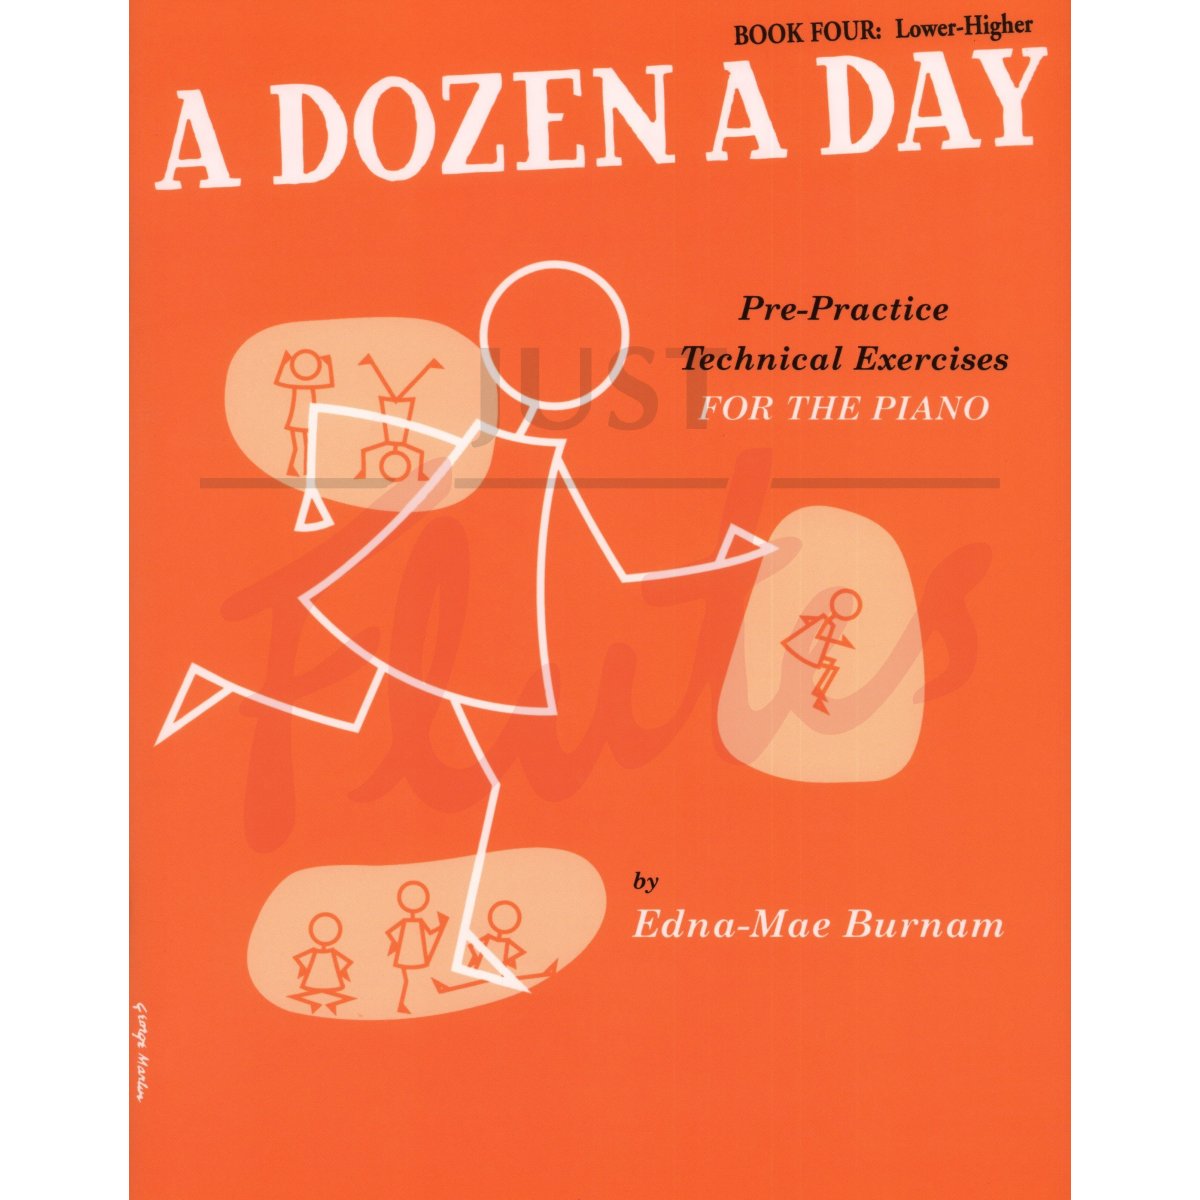 A Dozen A Day Book 4: Lower-Higher for Piano